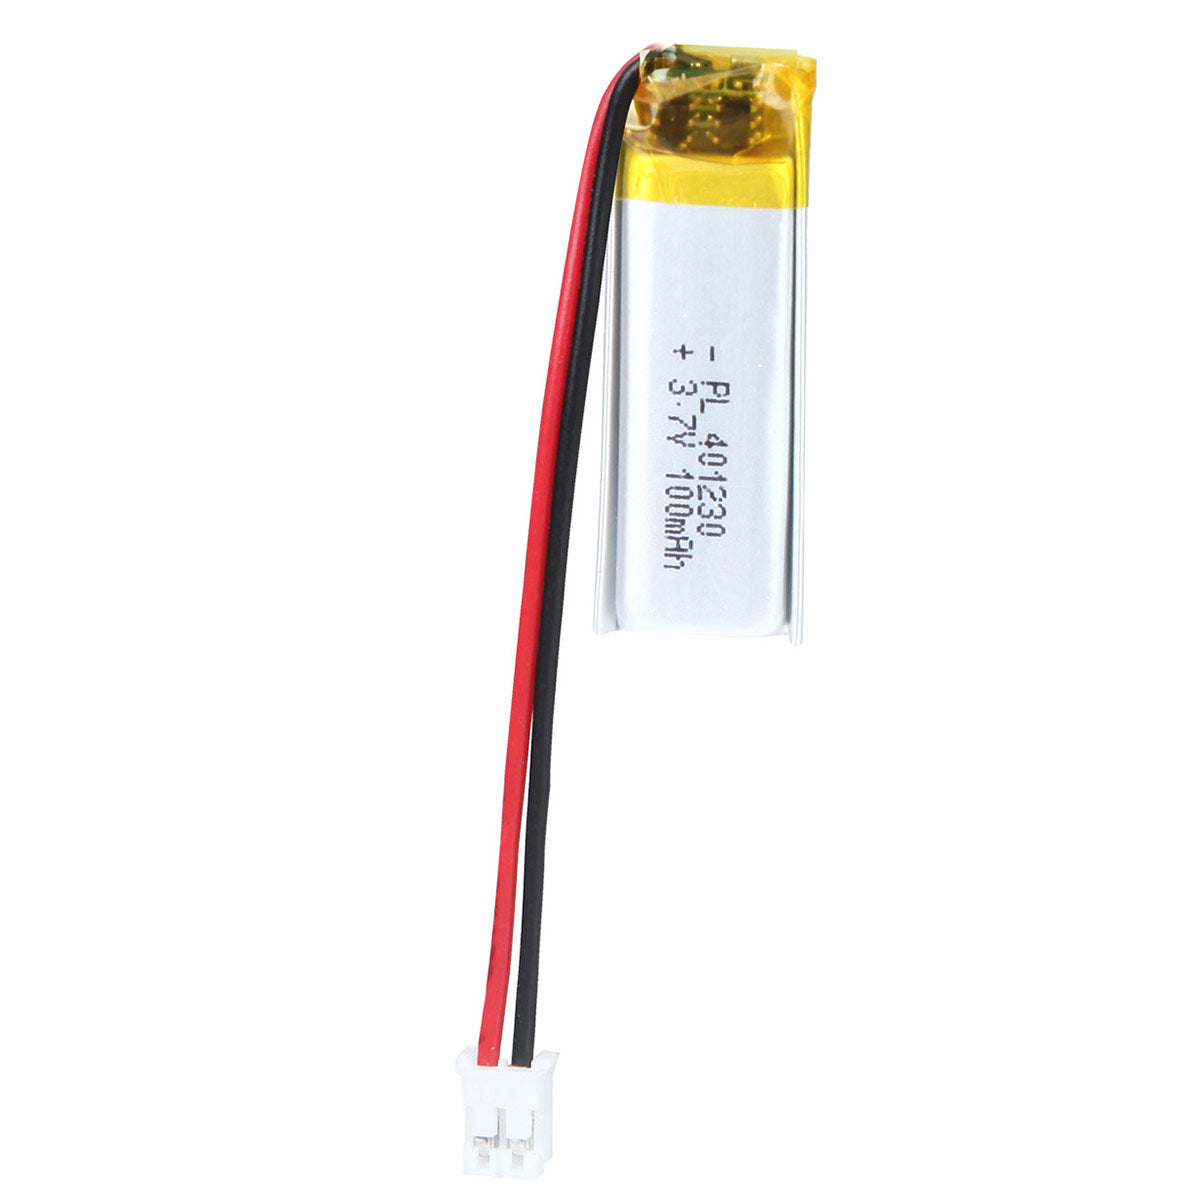 YDL 3.7V 100mAh 401230 Rechargeable Lithium Polymer Battery Length 32mm